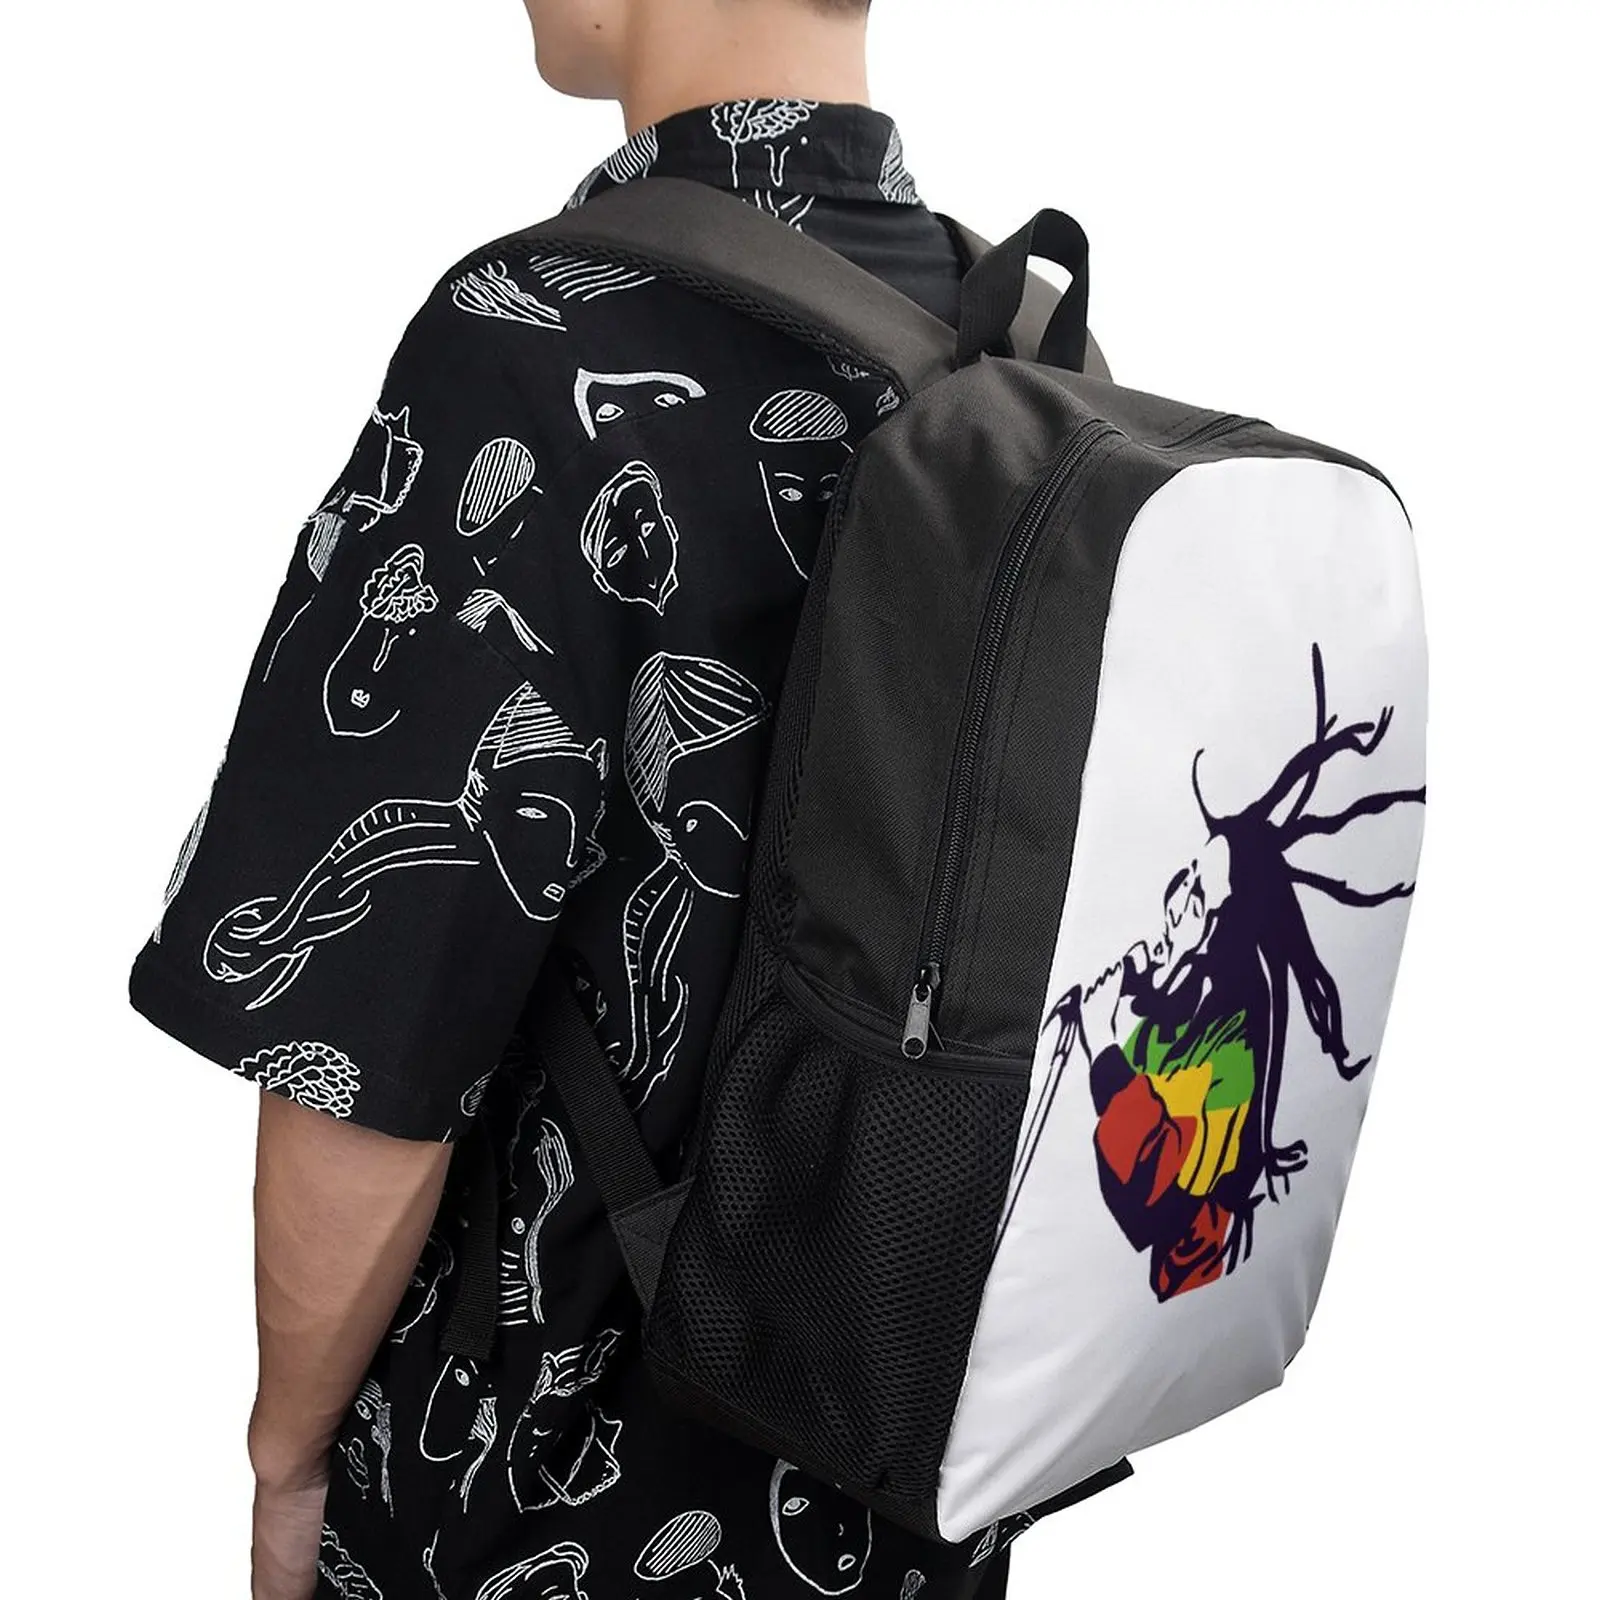 

17 Inch Shoulder Backpack Bobs And Marley - The King of Reggae Classic Lasting Graphic Cool Snug Schools Blanket Roll